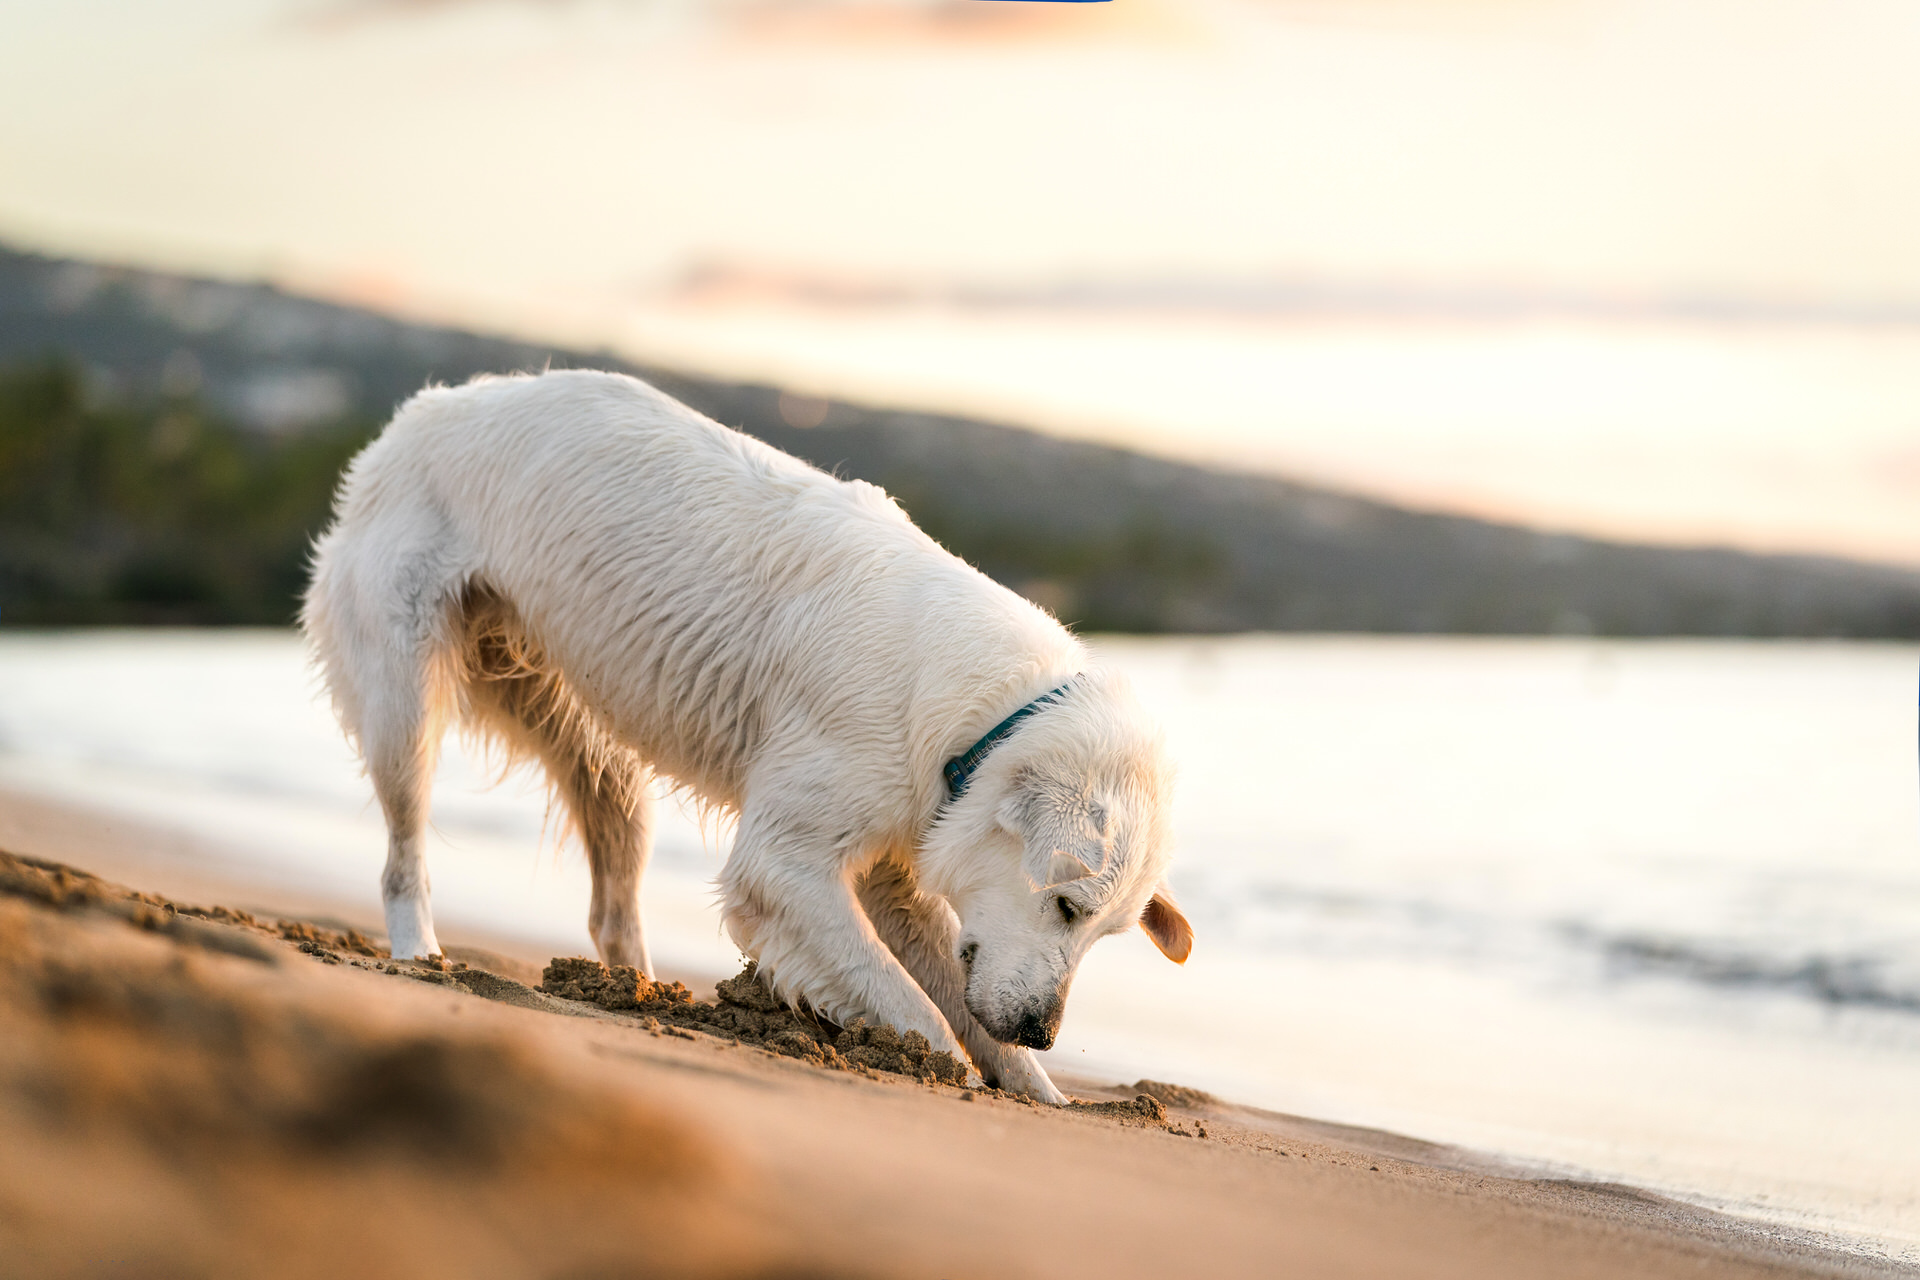 White dog sniffing sand on beach at sunset.